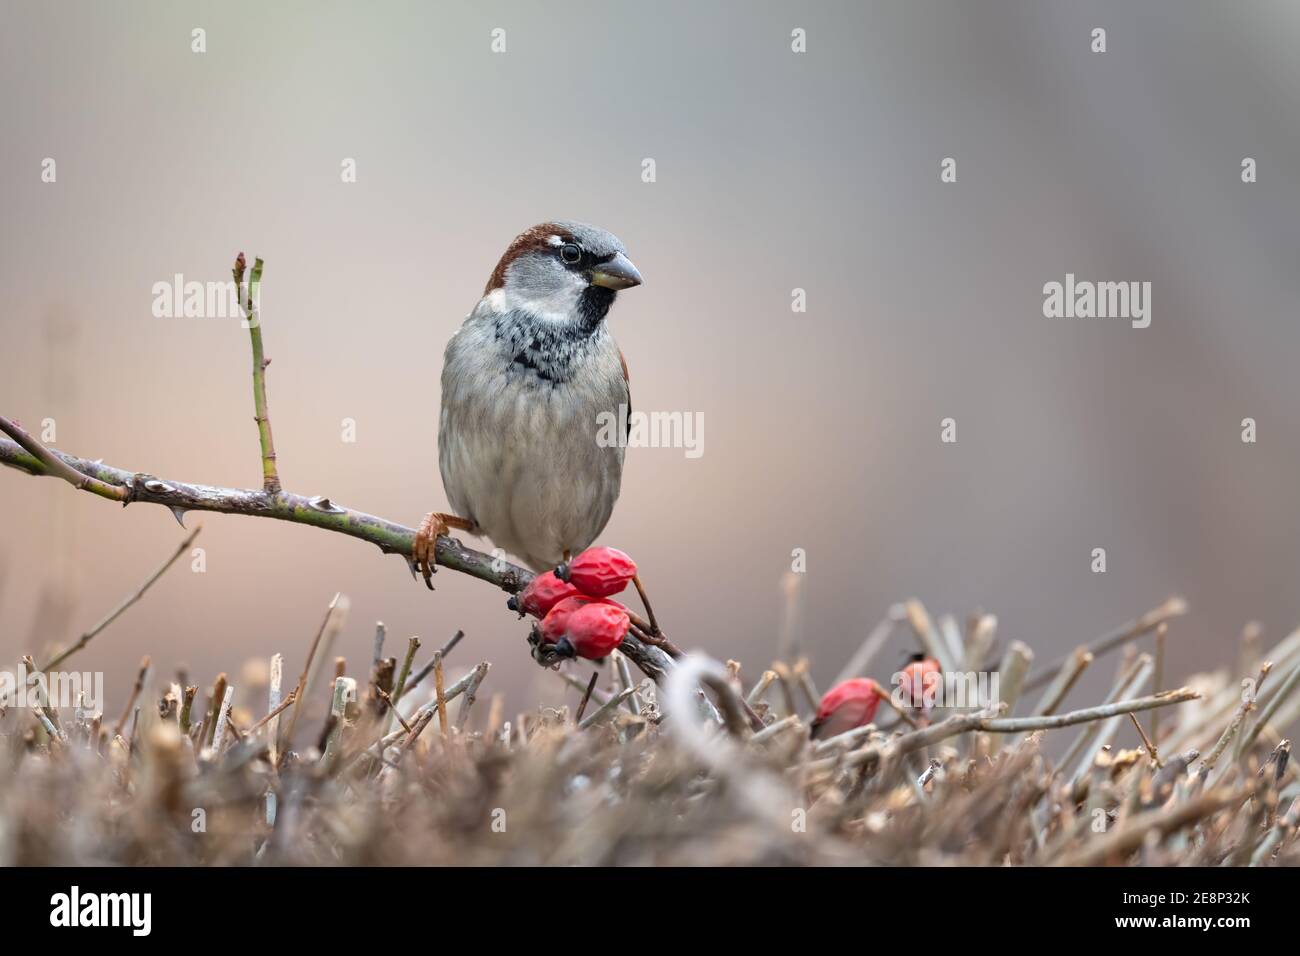 House Sparrow. Passer Domesticus, Standing on a bush with a nice blurry background Stock Photo